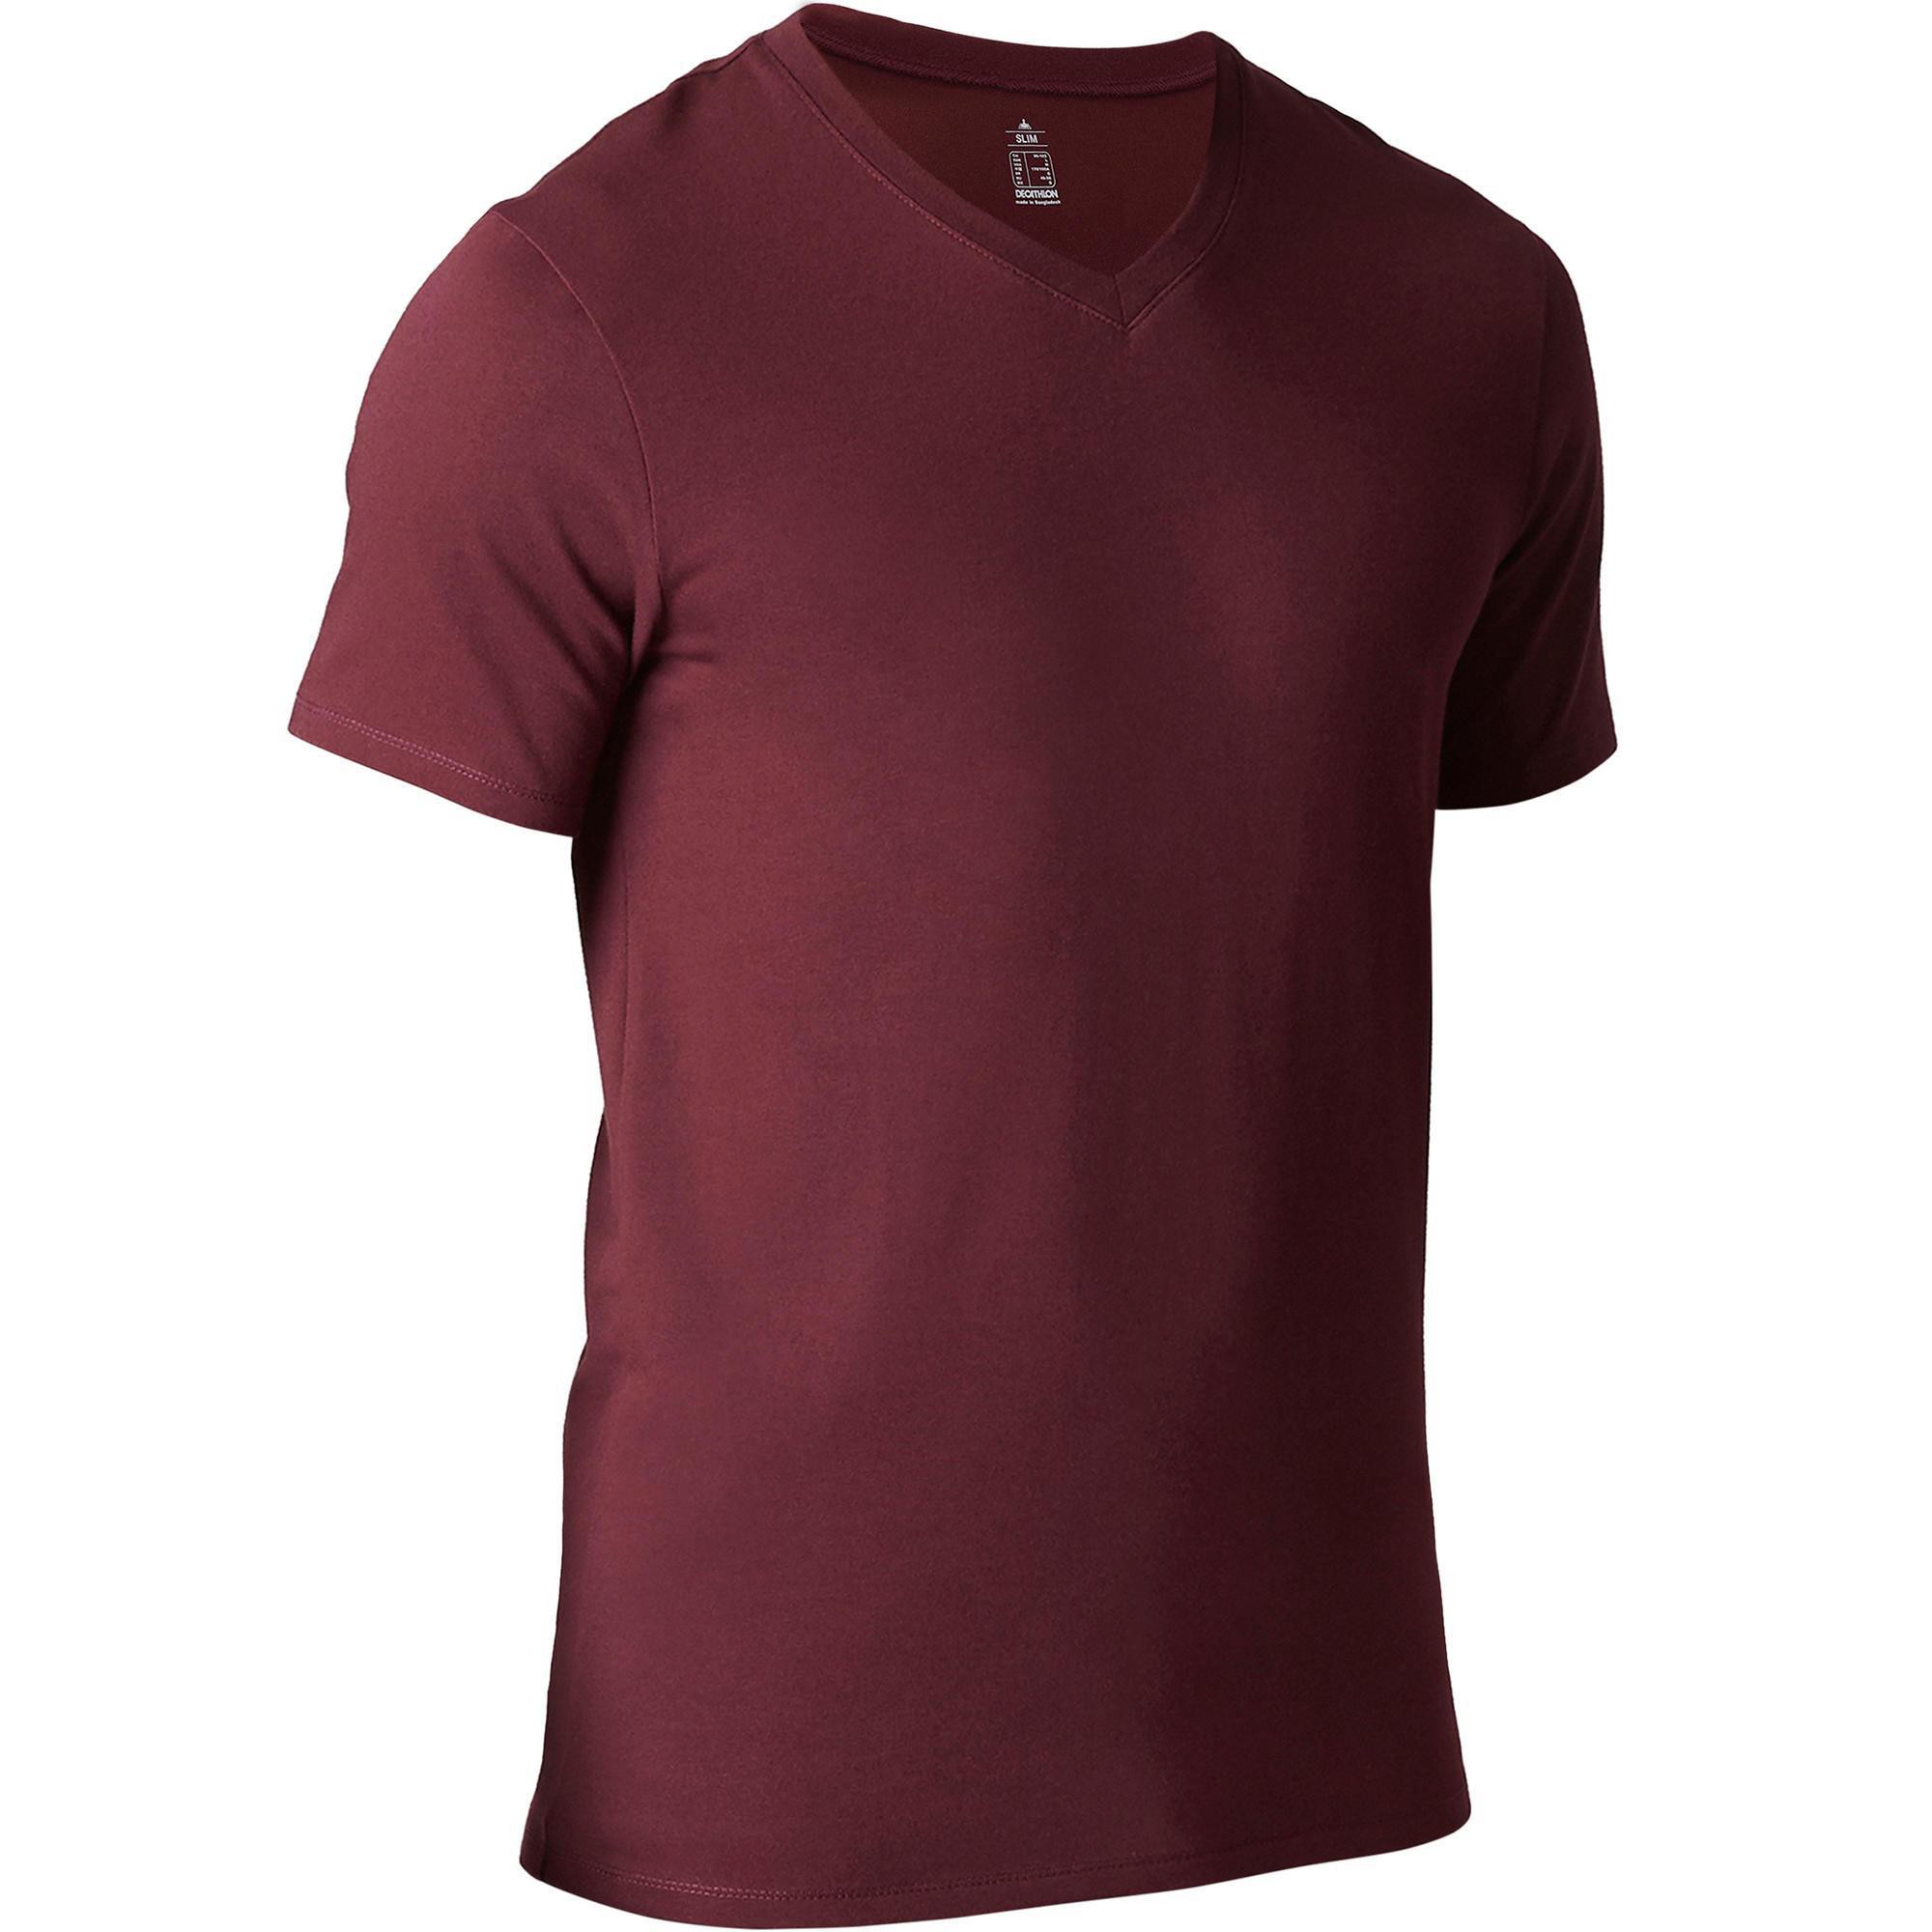 Super Slim Tshirt - Chocolate and Navy Blue Color: Mens Clothing  